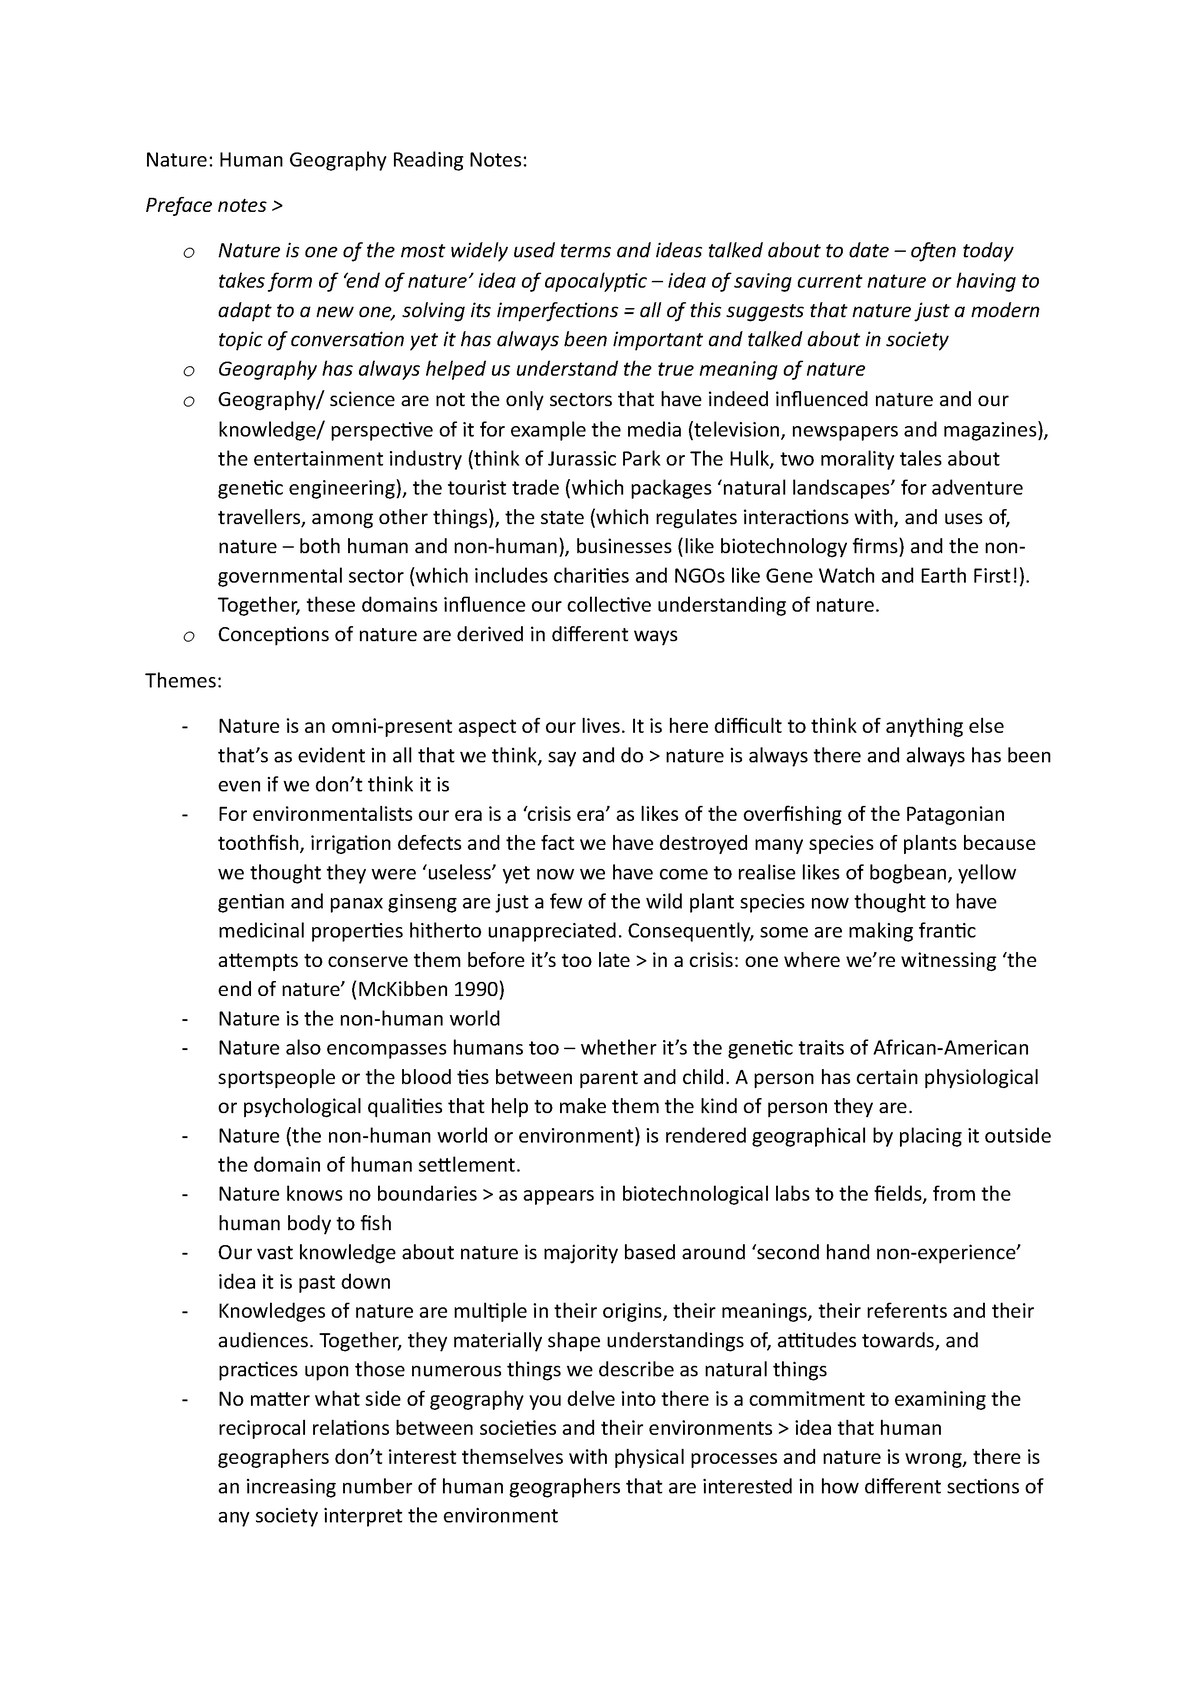 Nature Human Geo Notes - Nature: Human Geography Reading Notes: Preface ...